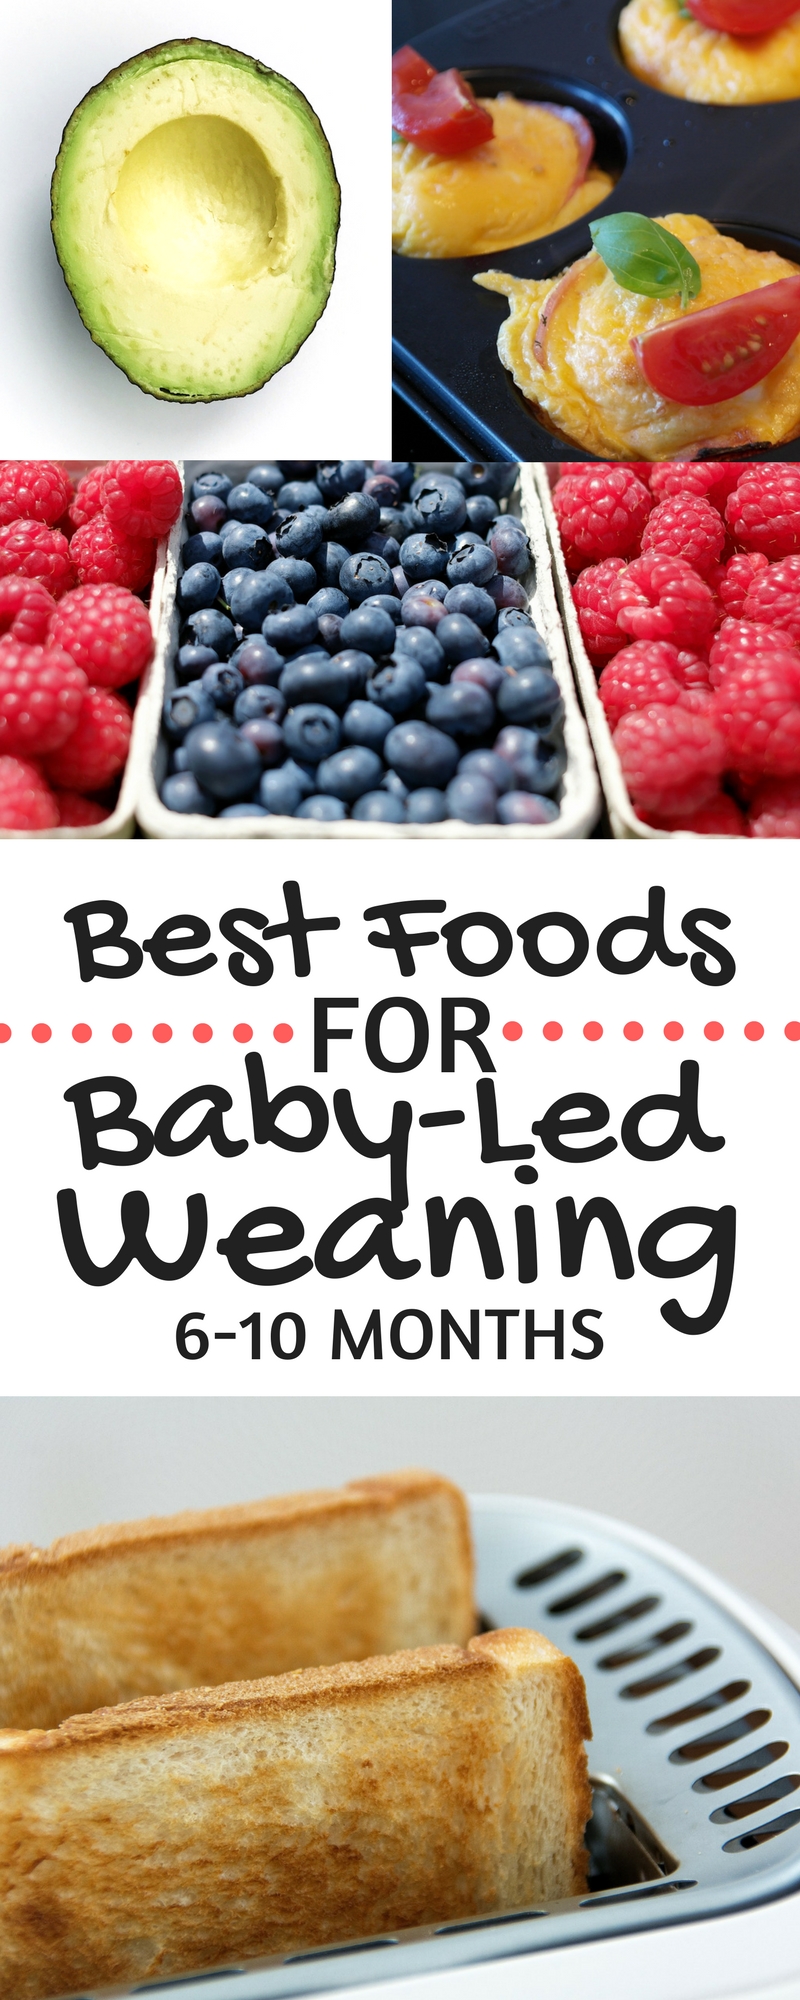 10 Attractive Food Ideas For 10 Month Old best foods for baby led weaning led weaning baby led weaning and 2022